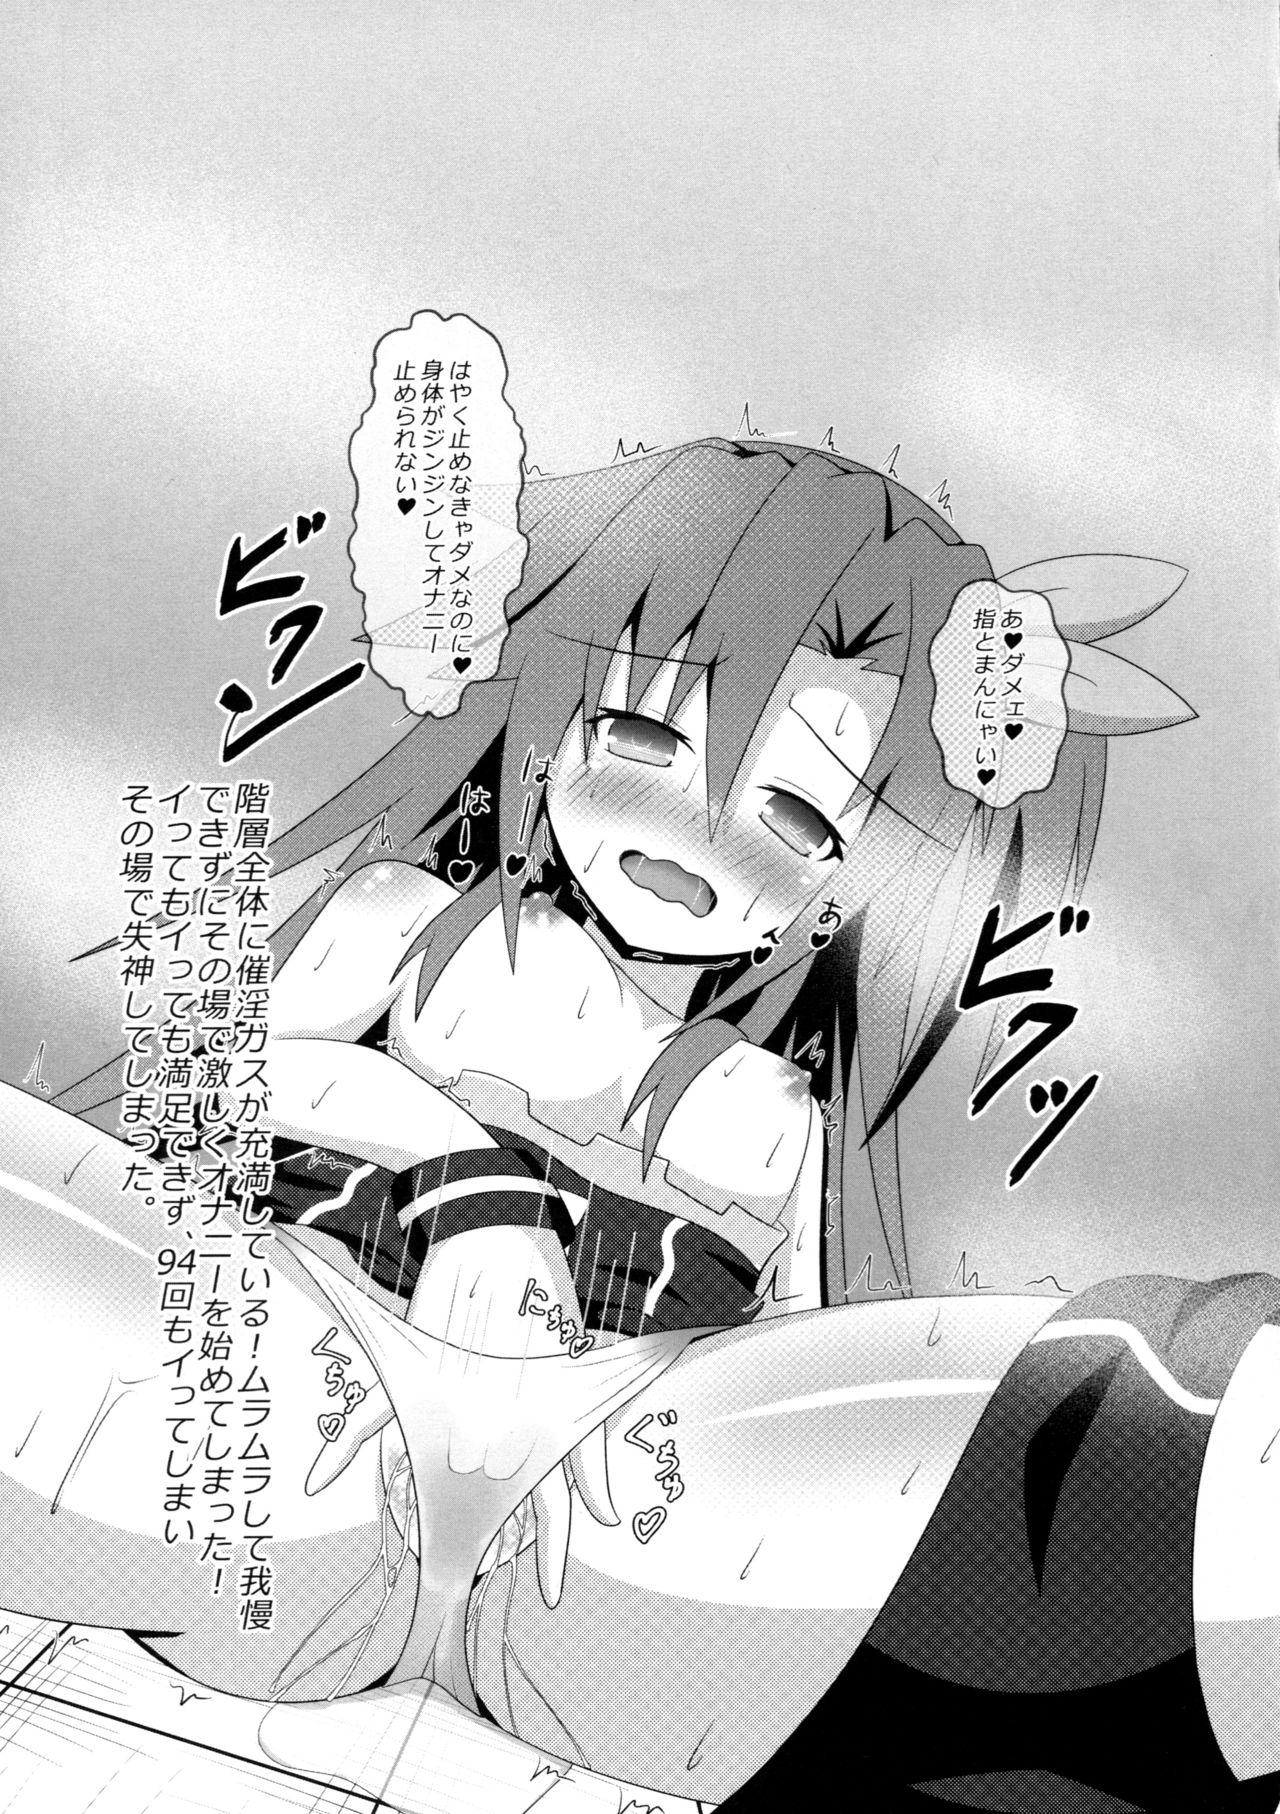 Fuck Porn IF-chan to Ero Trap Dungeon - Hyperdimension neptunia Large - Page 9